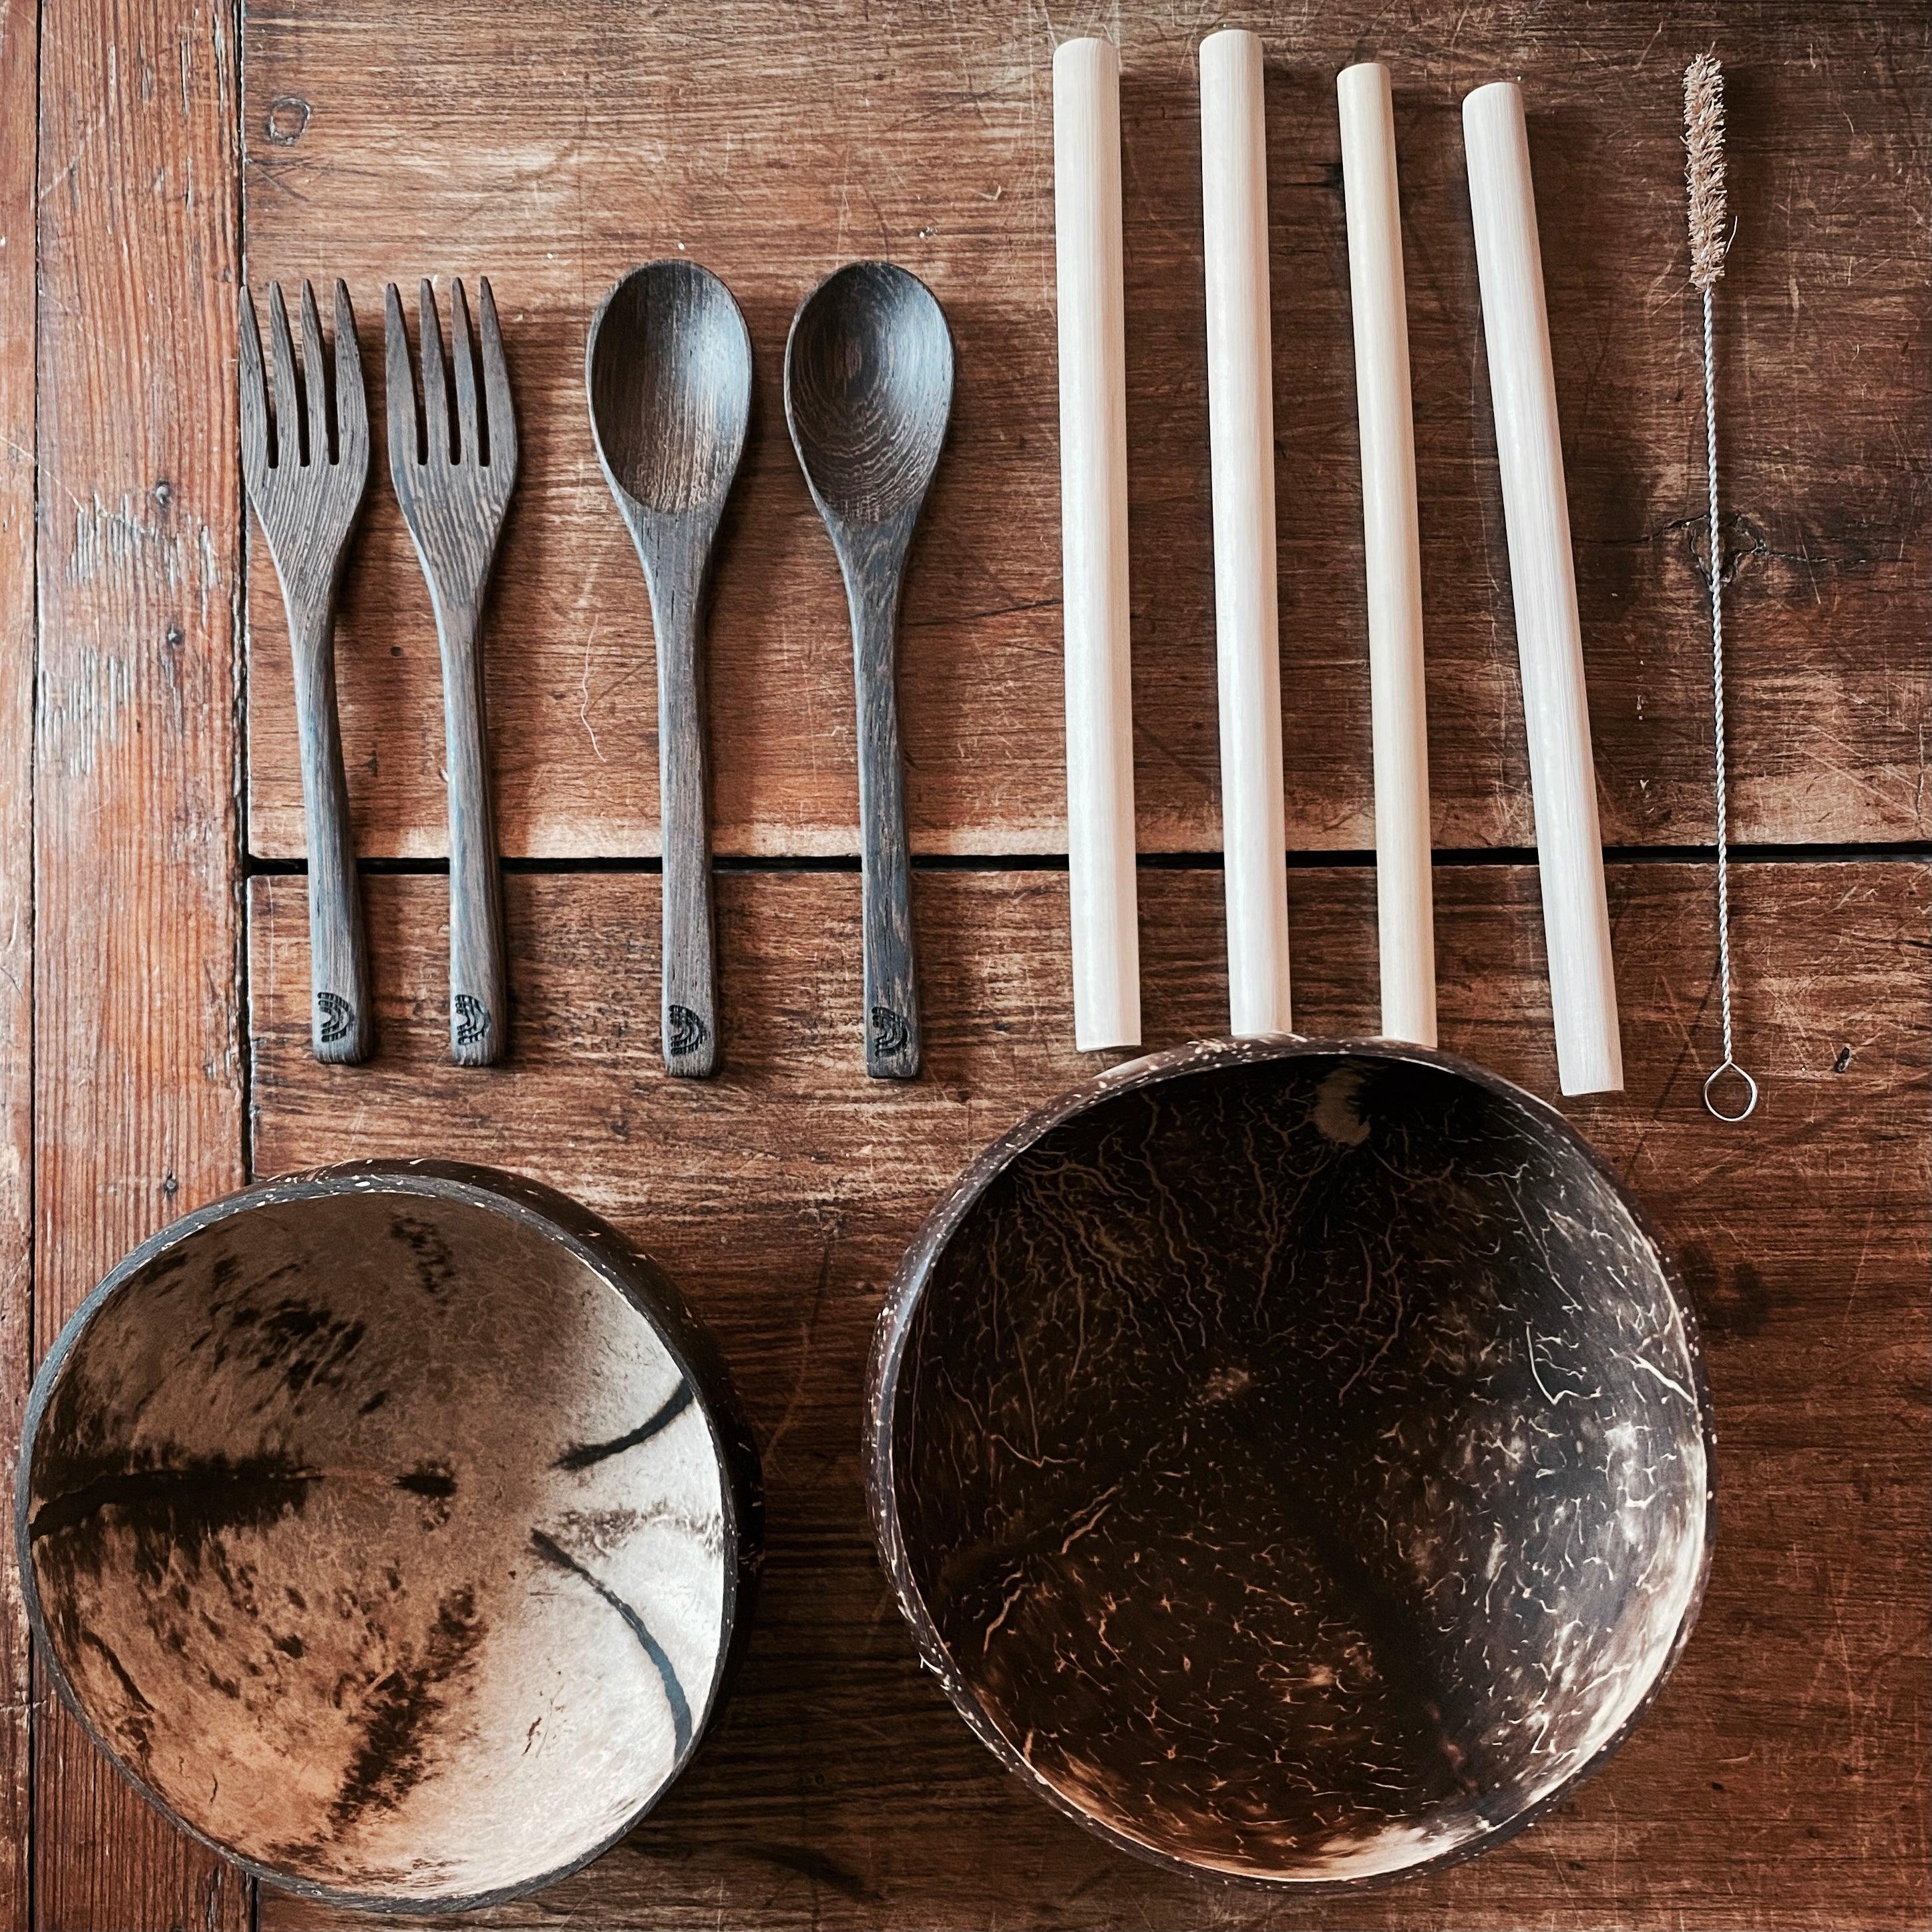 Eco Coco Pack | SAVE 10%! - Coco Bowls | Organic Coconut Bowls | Bamboo Straws | Zero Waste Goods